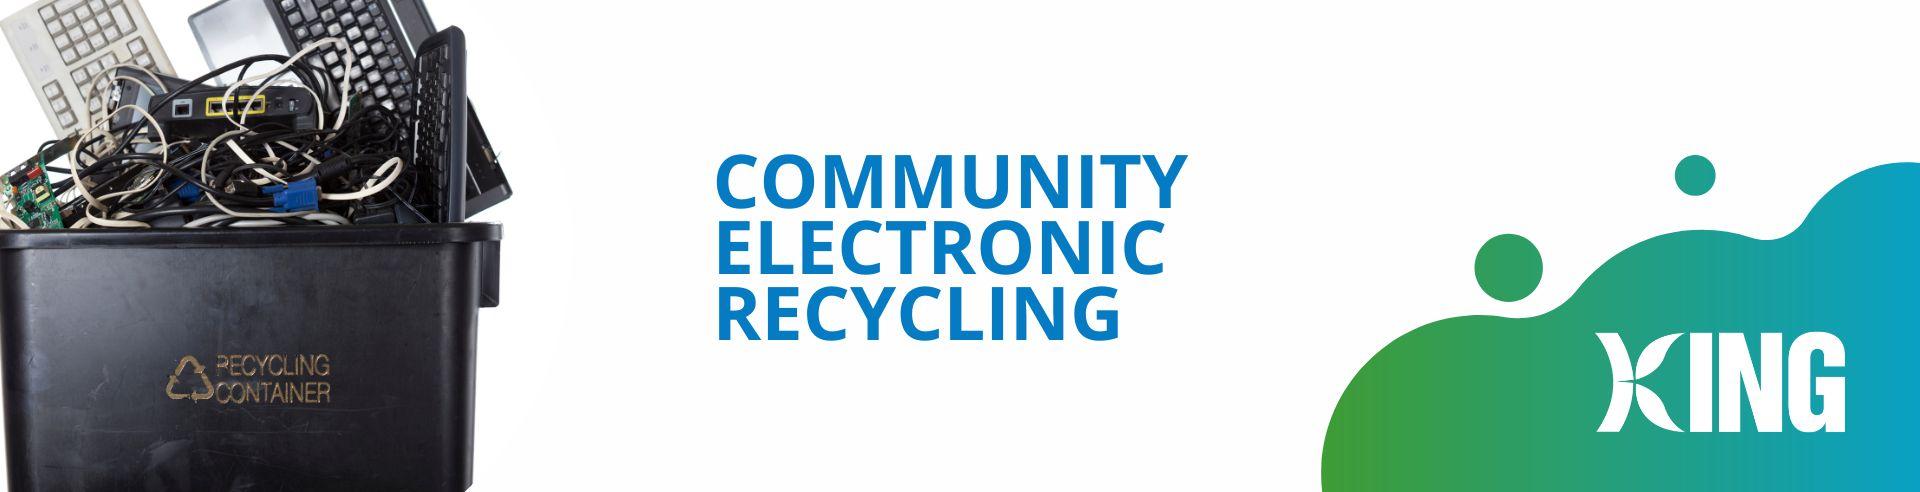 Community Electronic Recycling